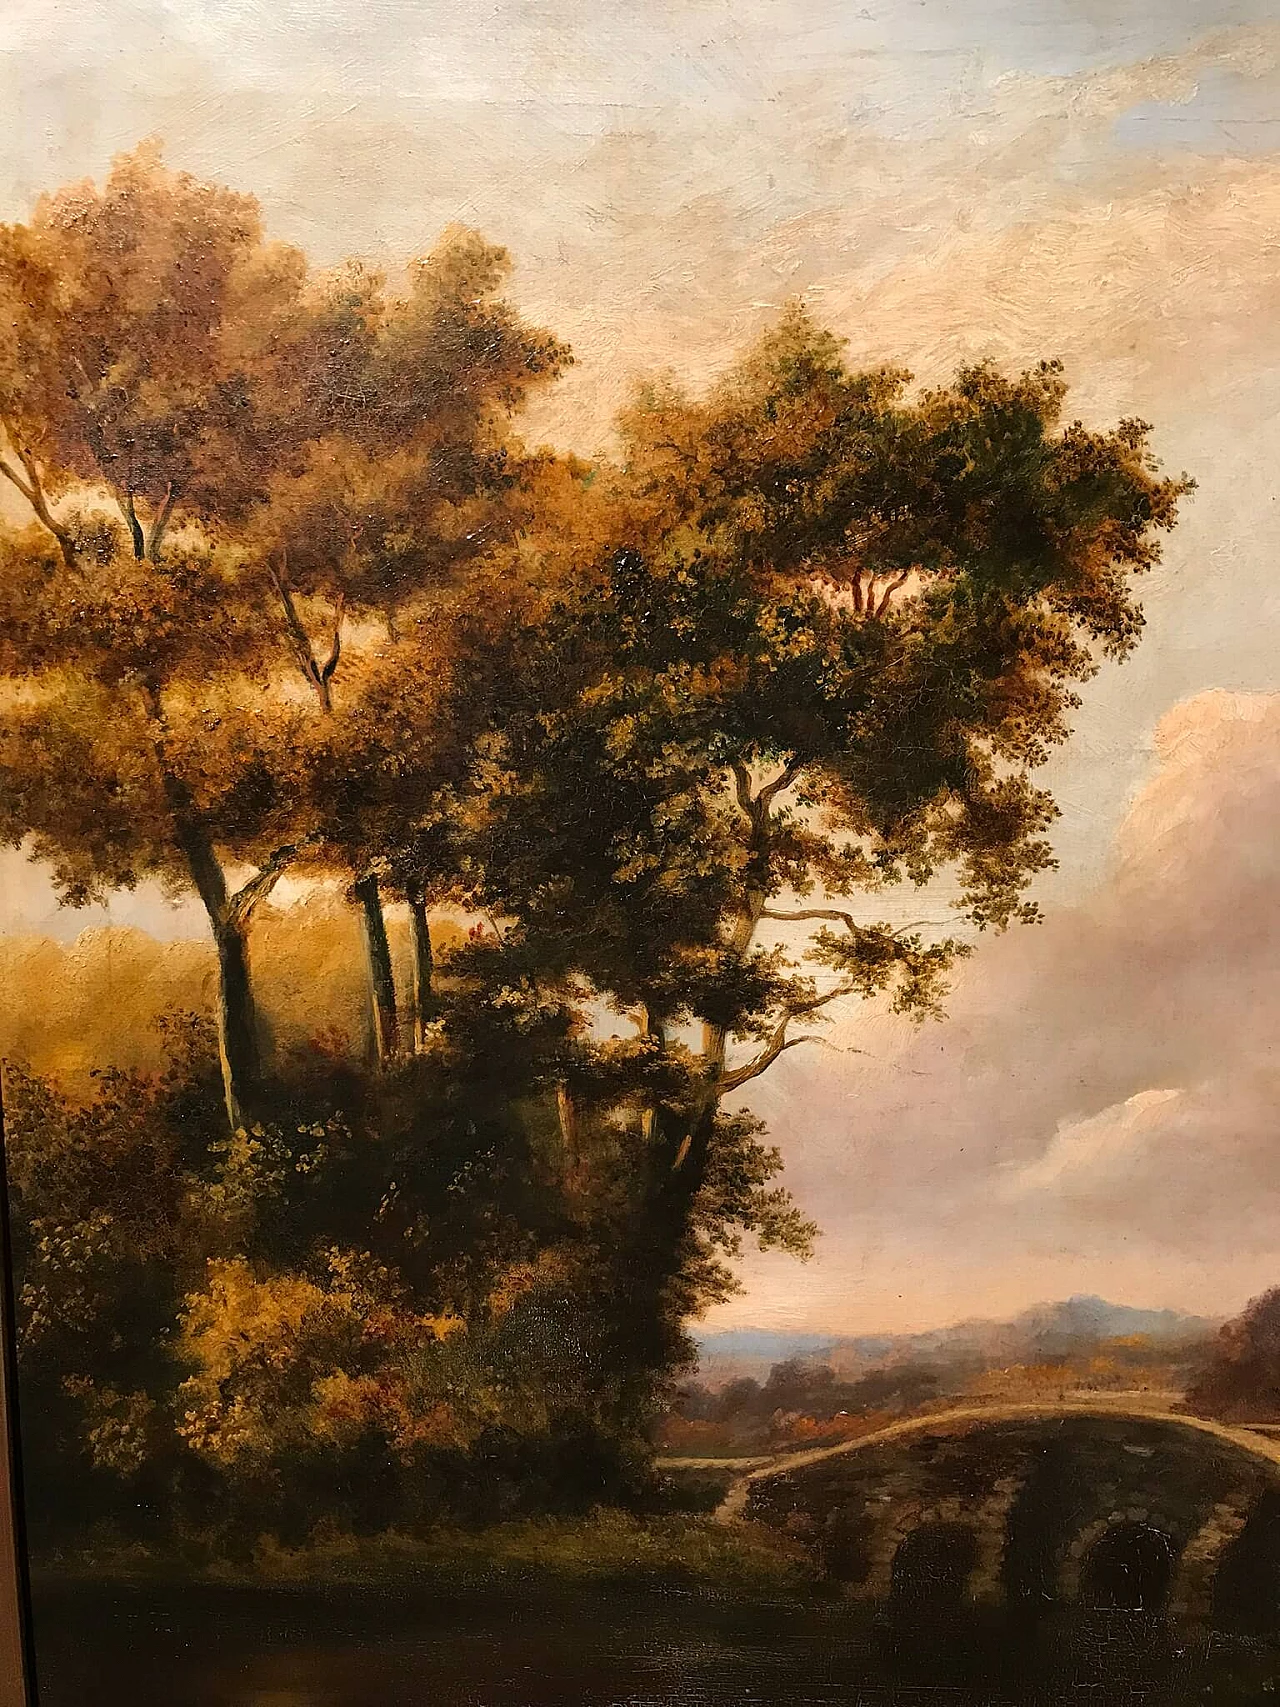 Oil painting on canvas with bucolic landscape, '800 1175907